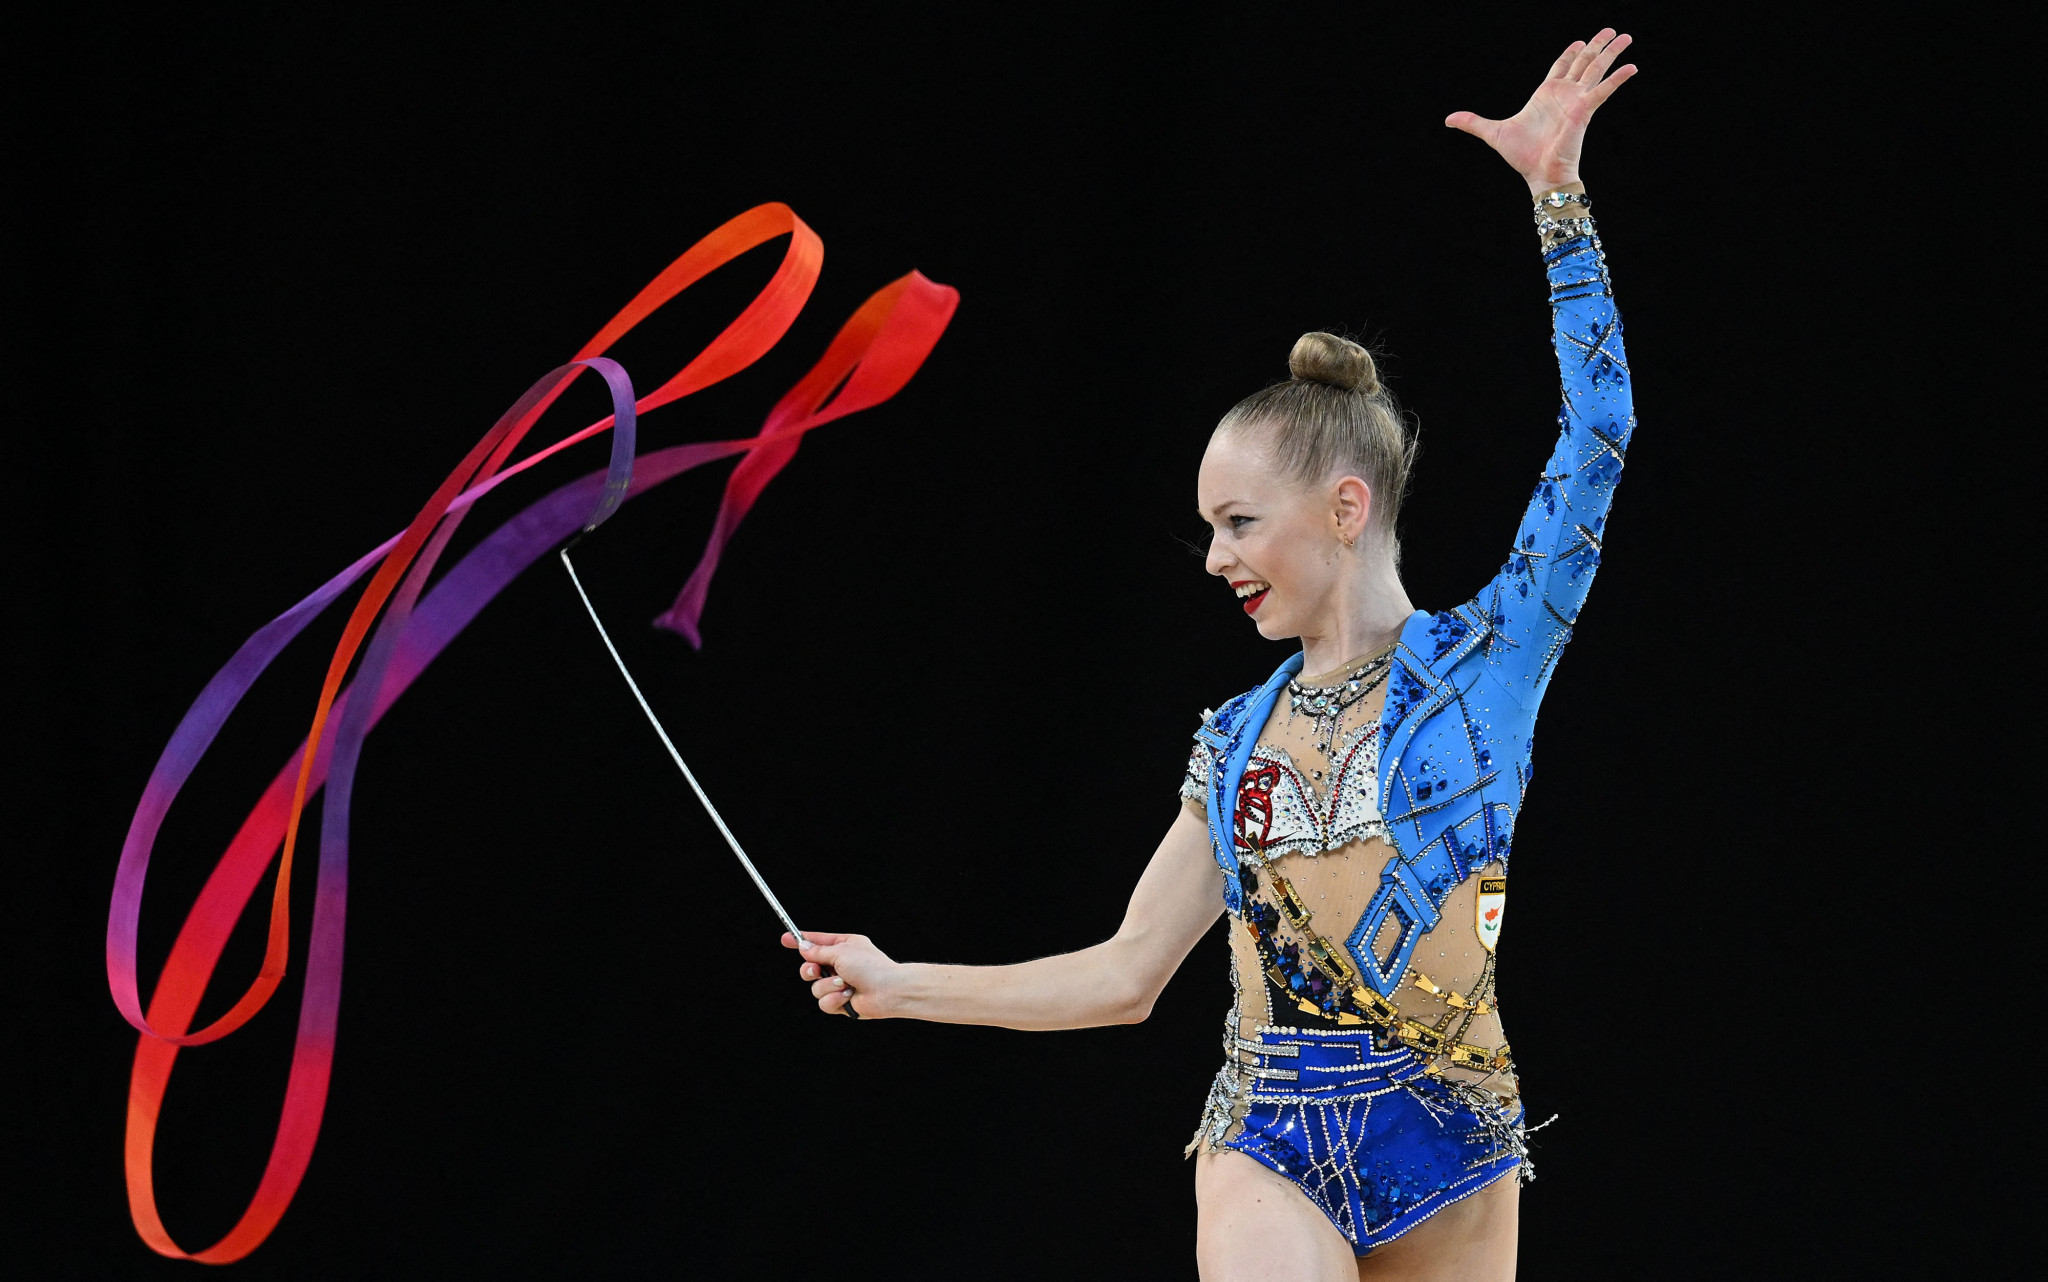 First Paris 2024 quota places available at Rhythmic Gymnastics World Championships